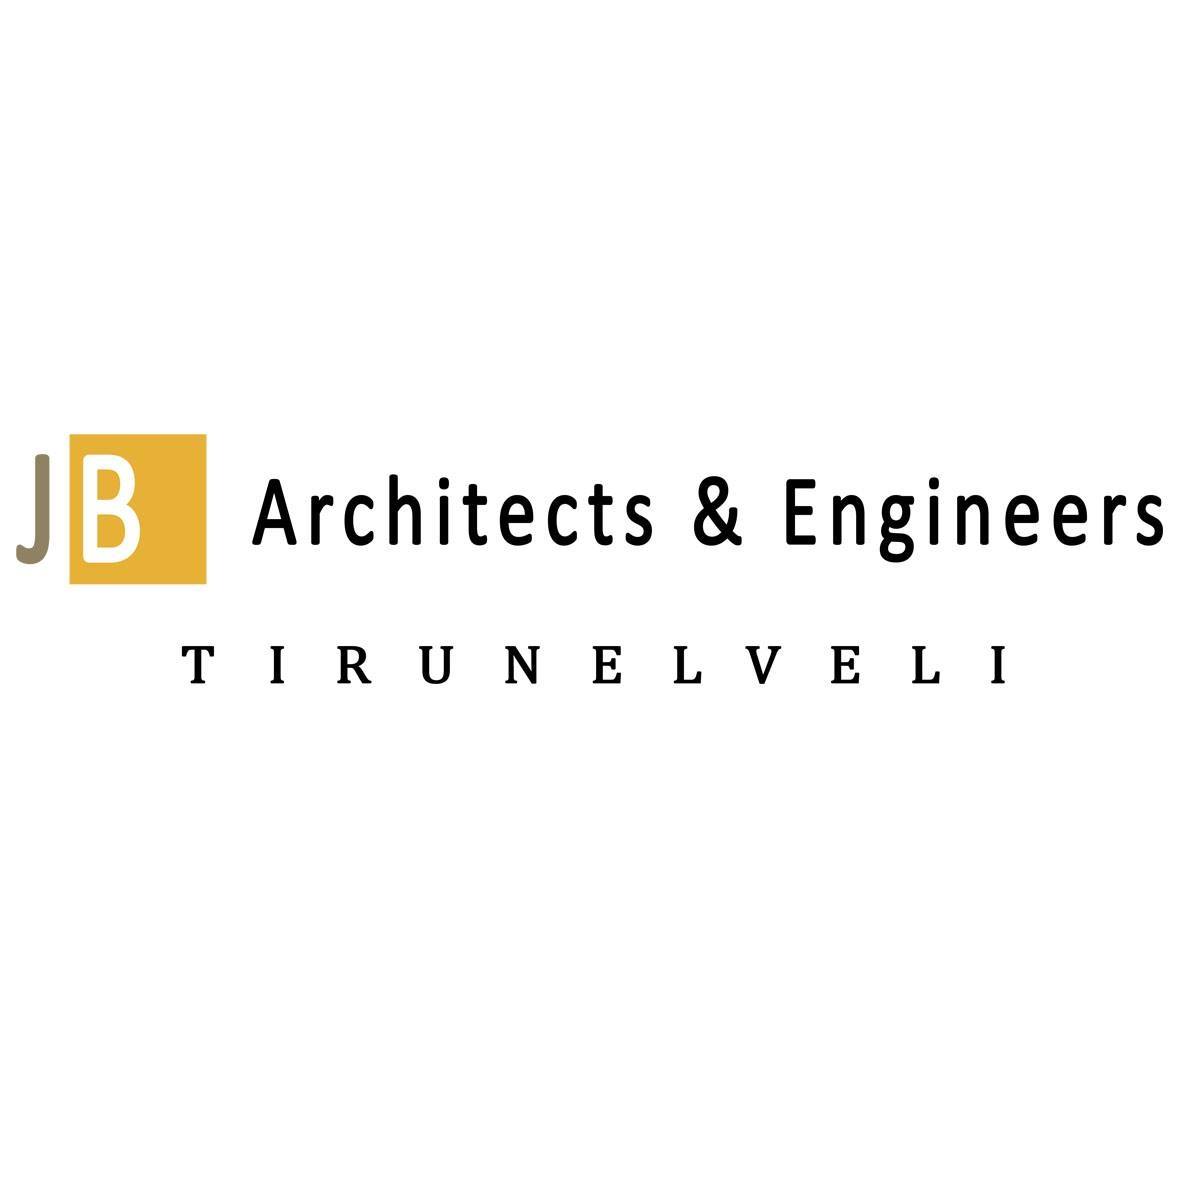 JB Architects & Engineers|Legal Services|Professional Services